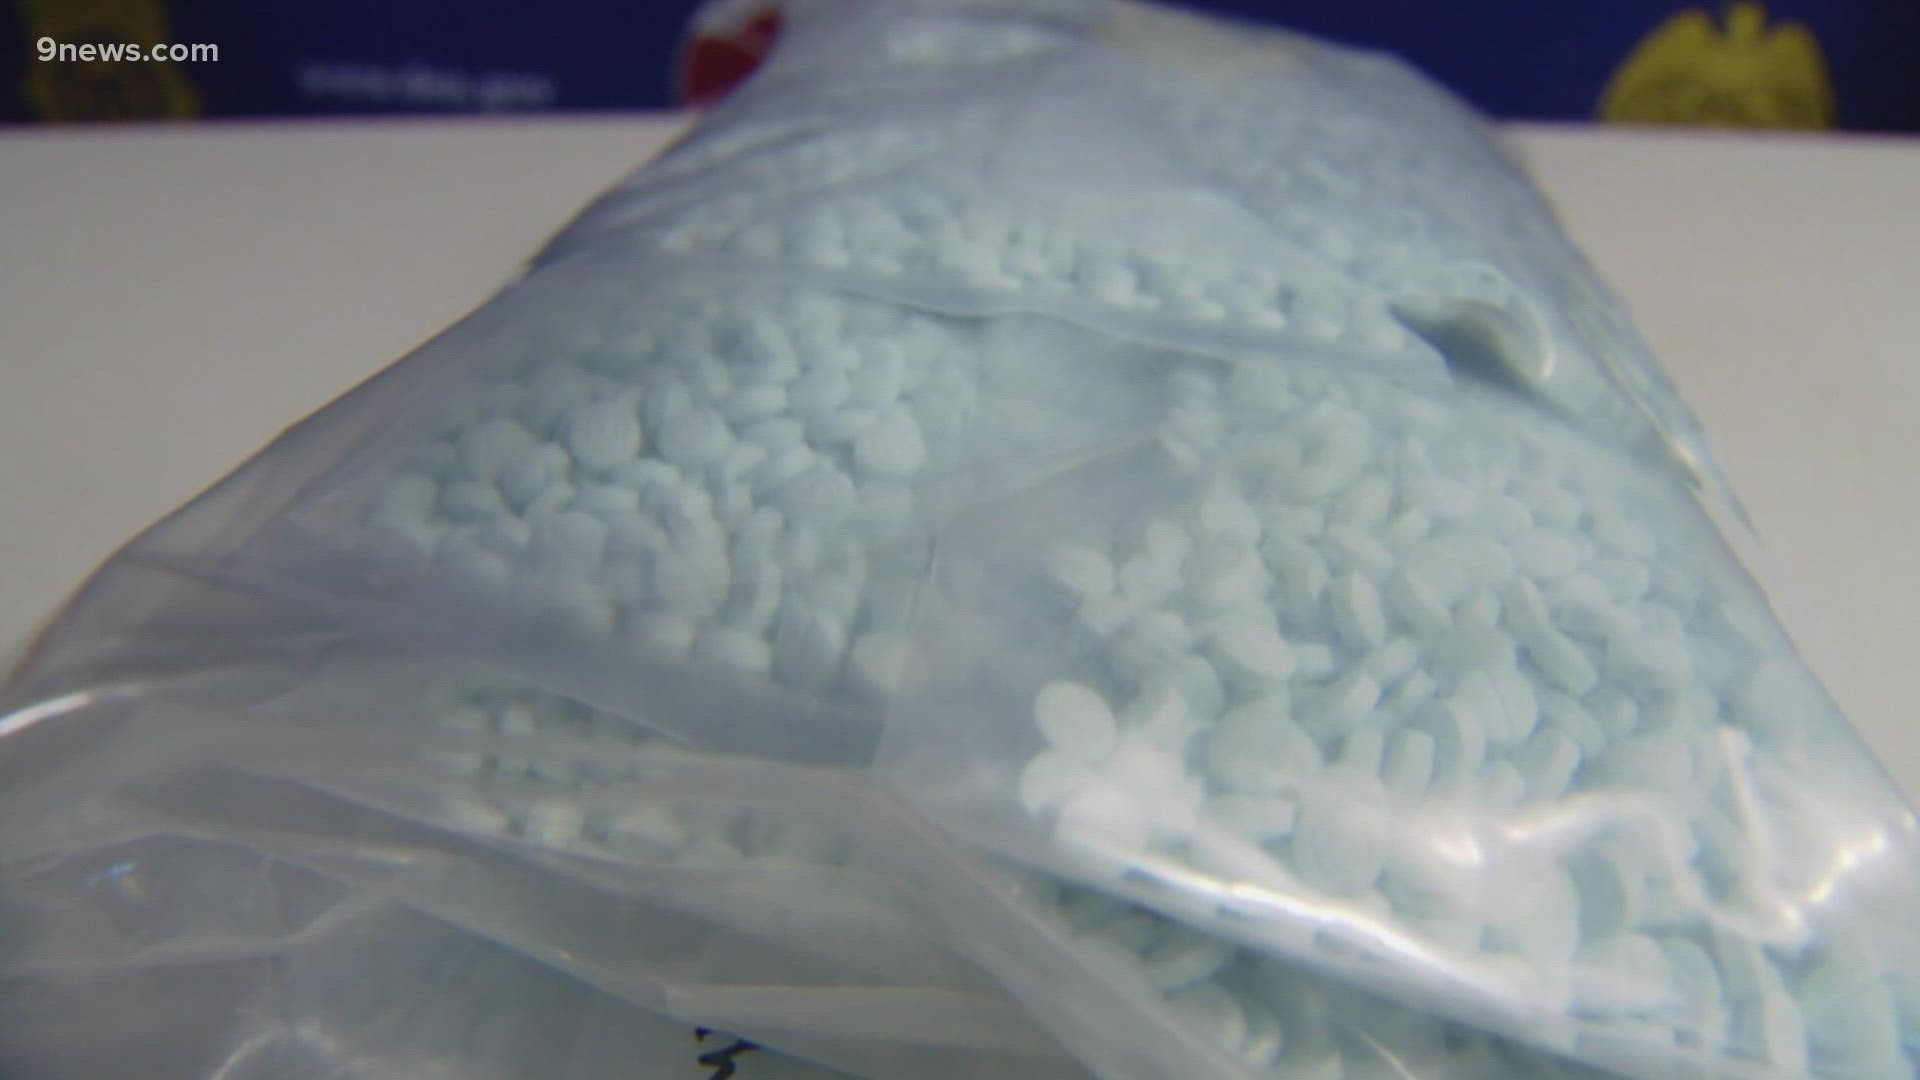 A bill introduced Thursday would let schools hand out fentanyl testing strips to students.